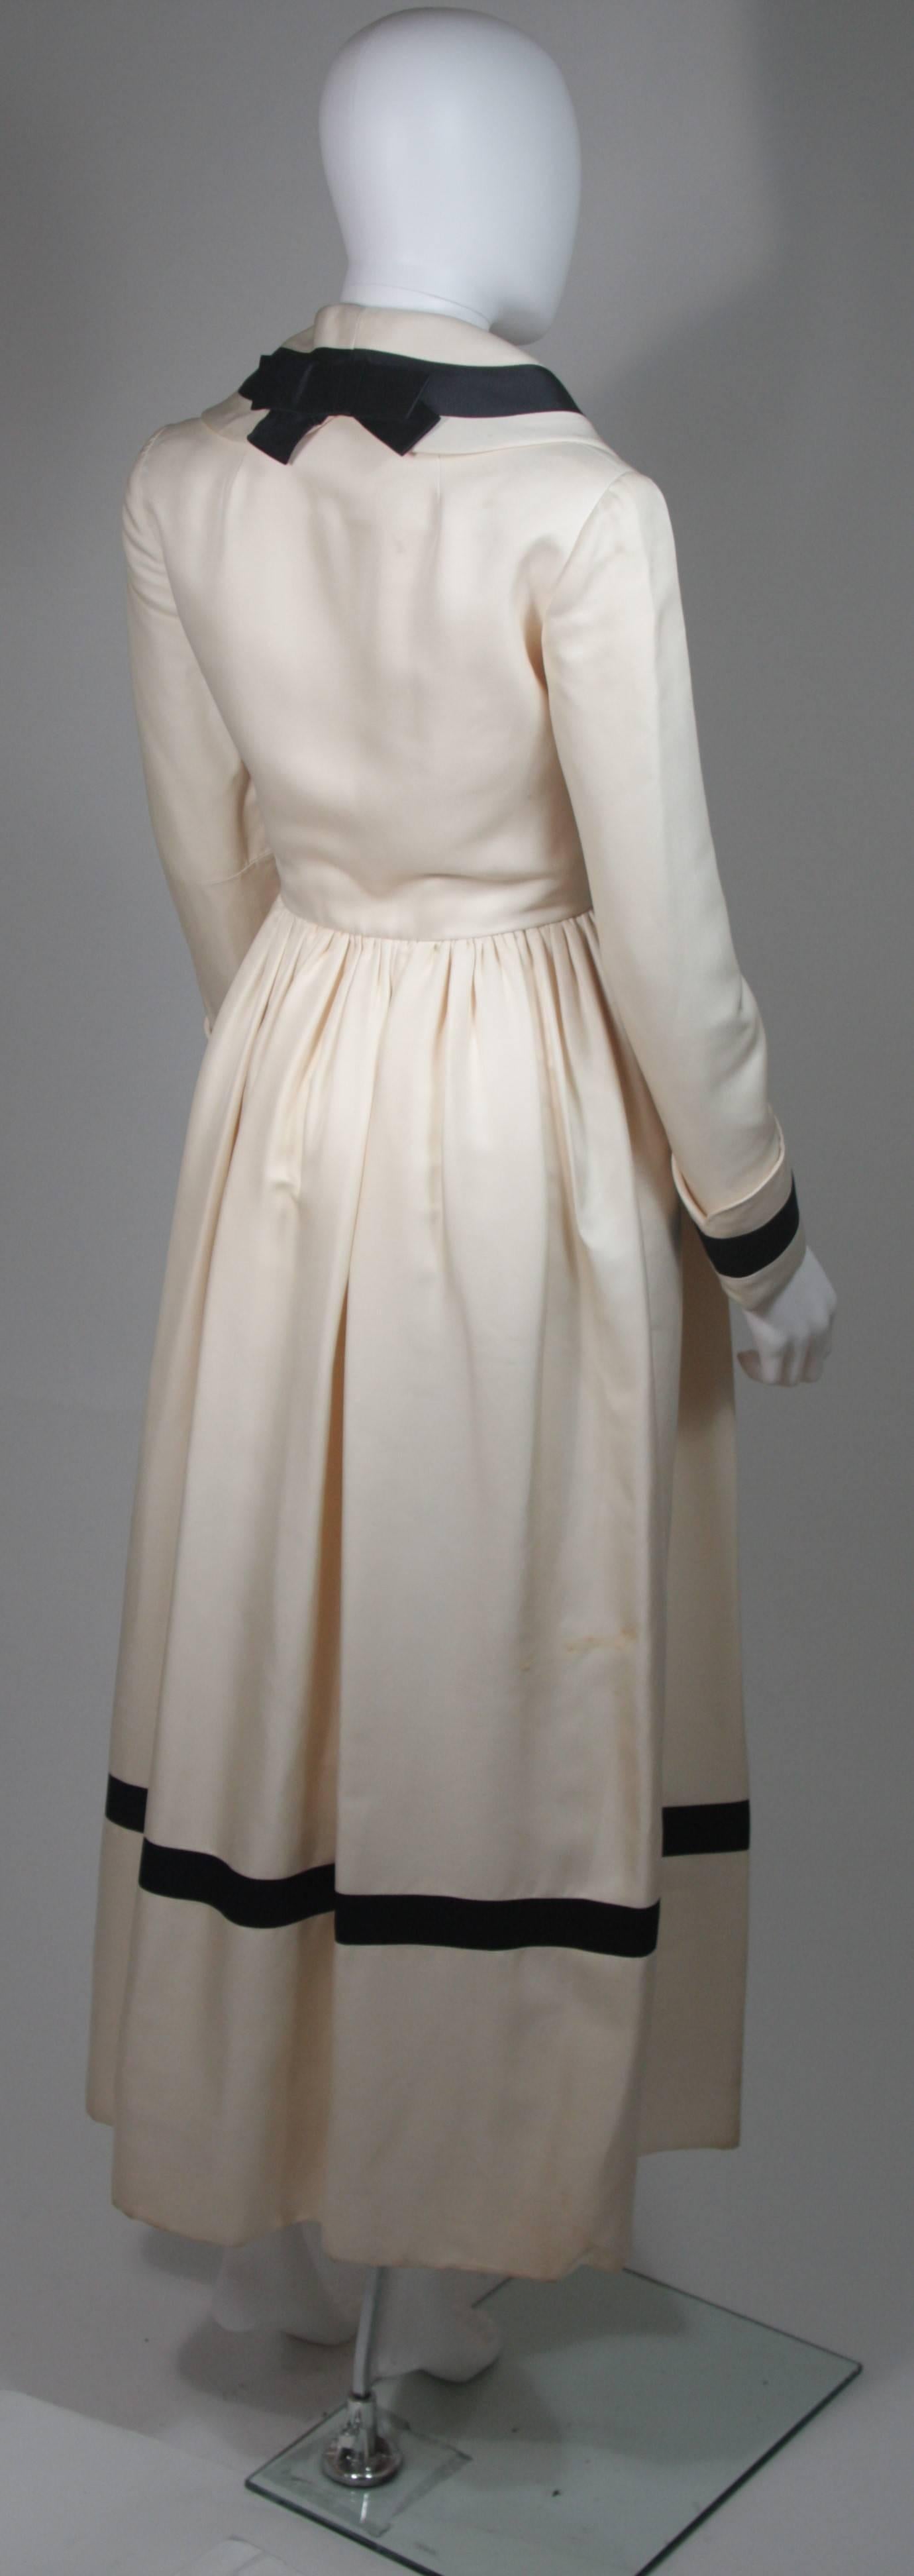 Geoffrey Beene Cream and Black Sailor Inspired Dress Size Small 1